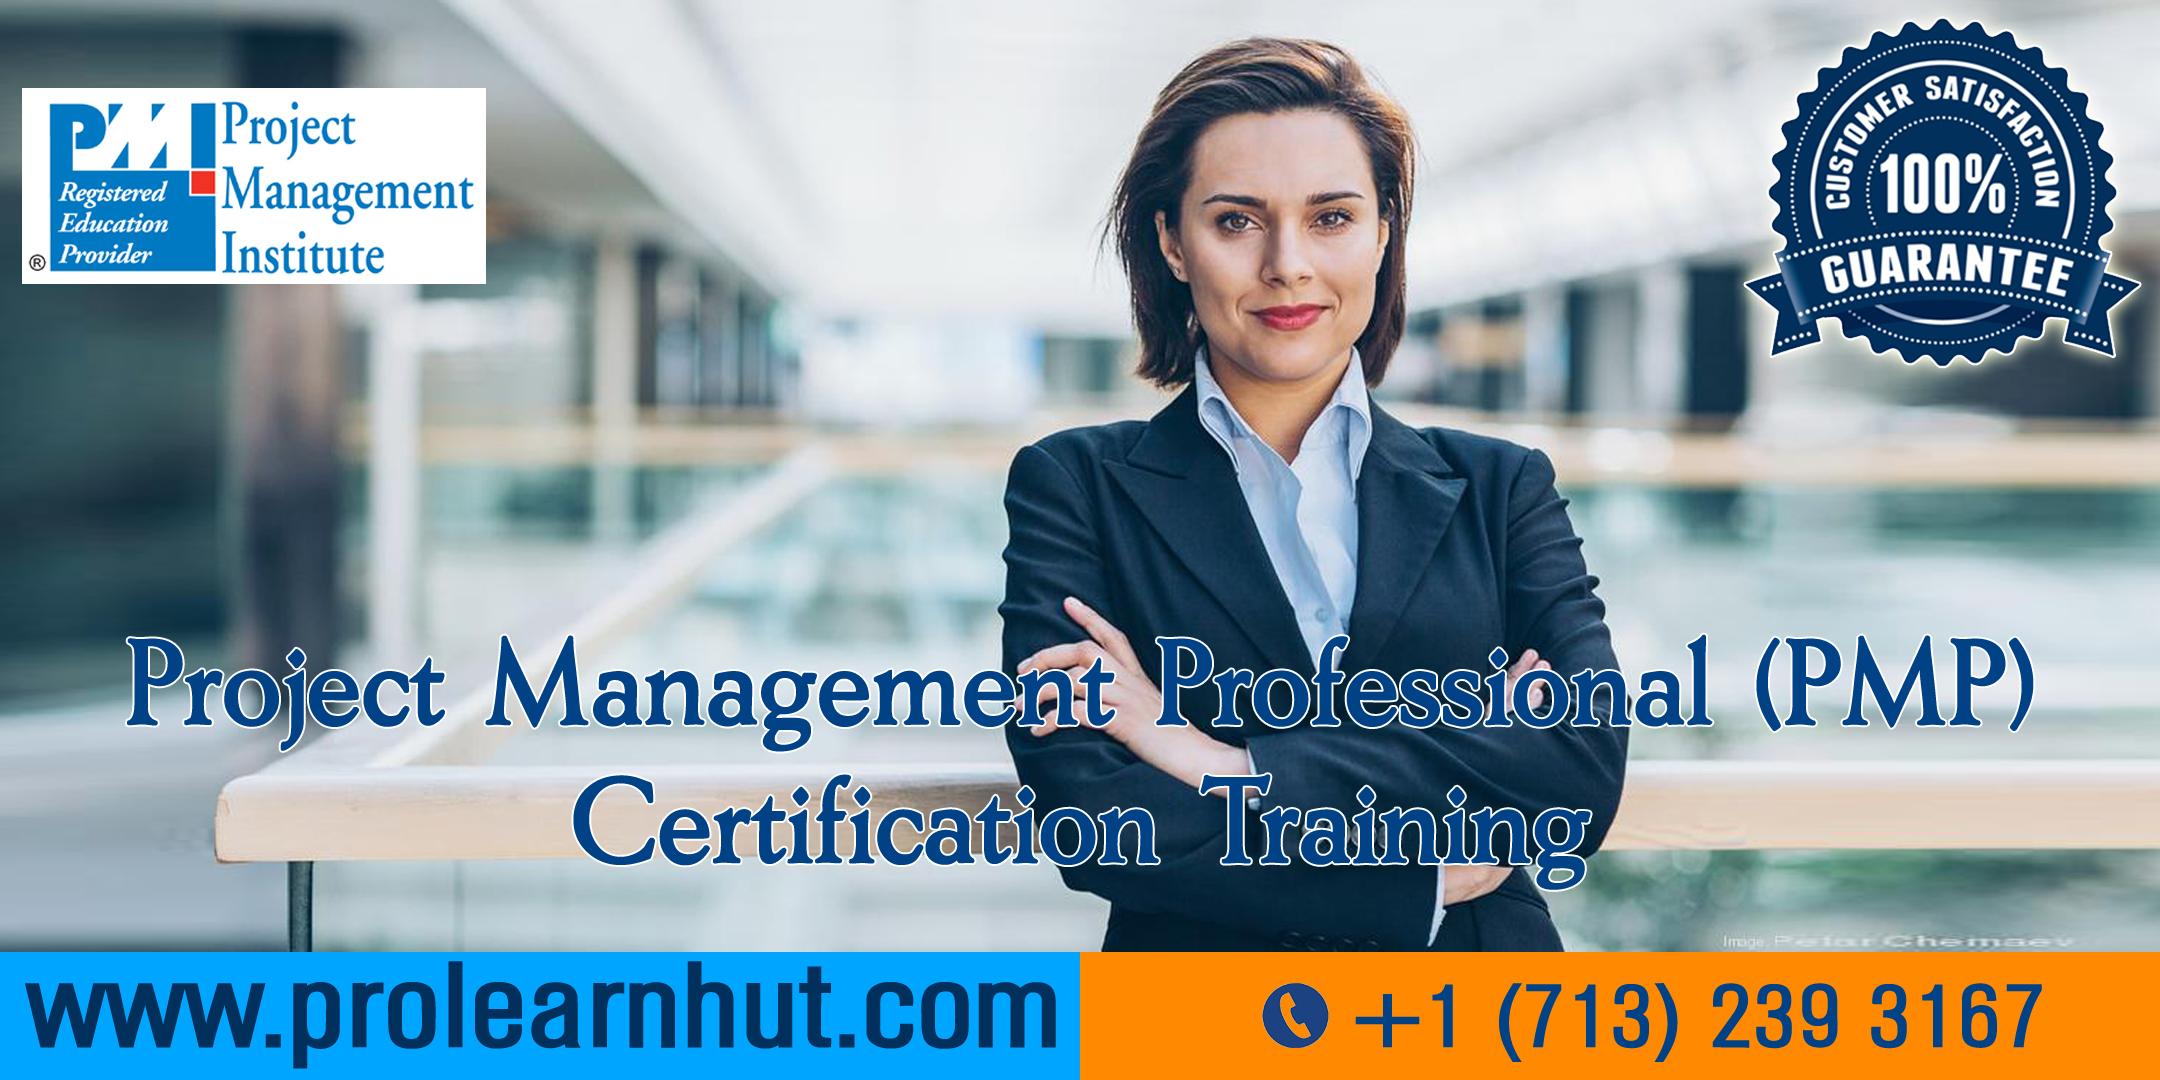 PMP Certification | Project Management Certification| PMP Training in Anchorage, AK | ProLearnHut